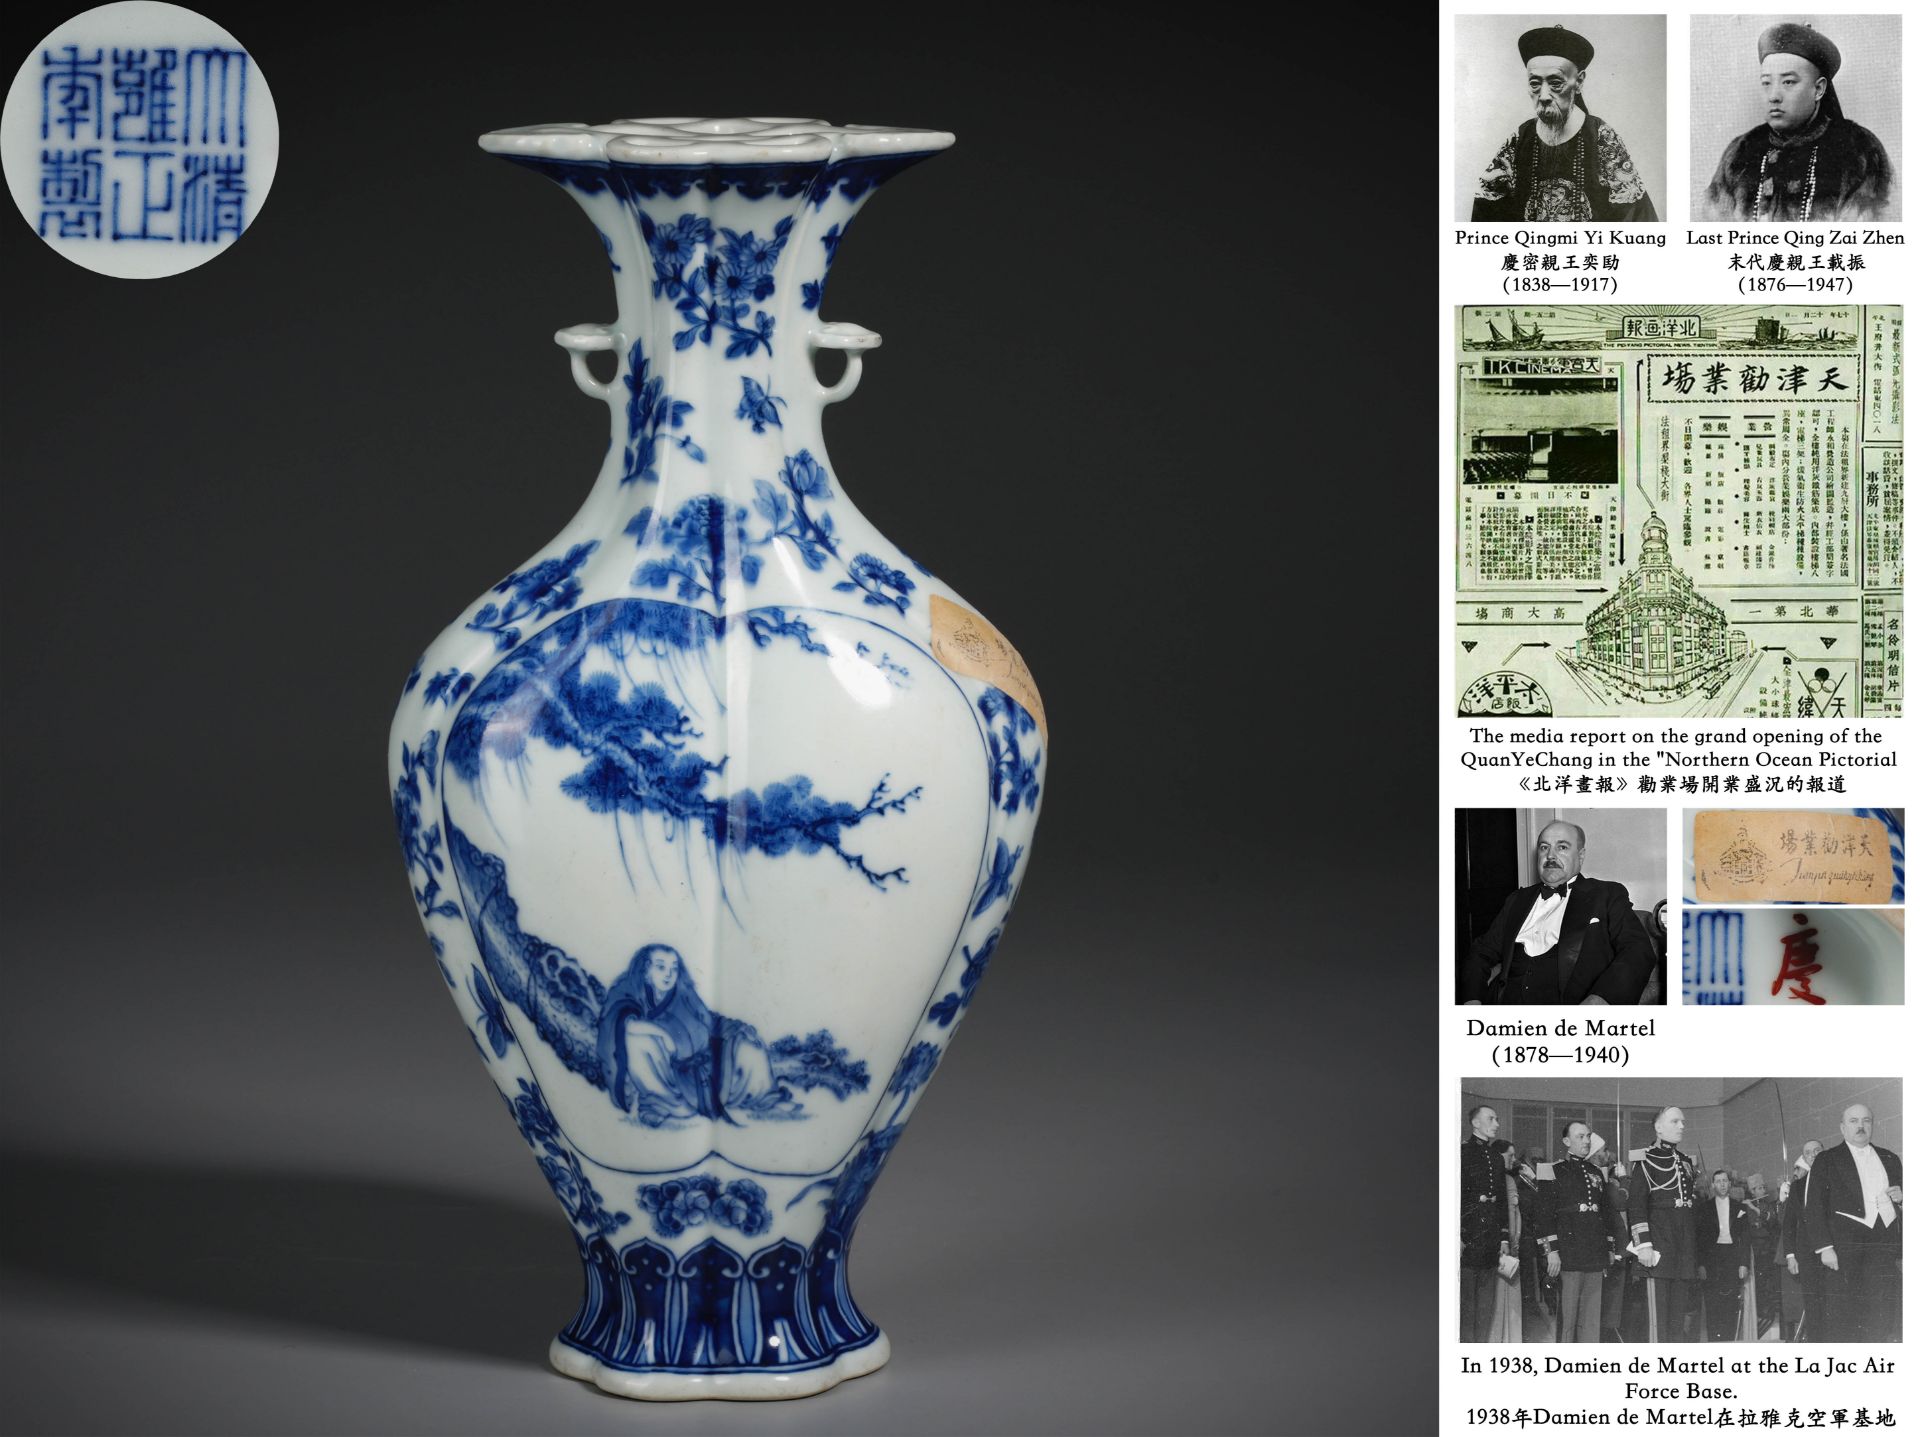 A Chinese Blue and White Figural Story Vase